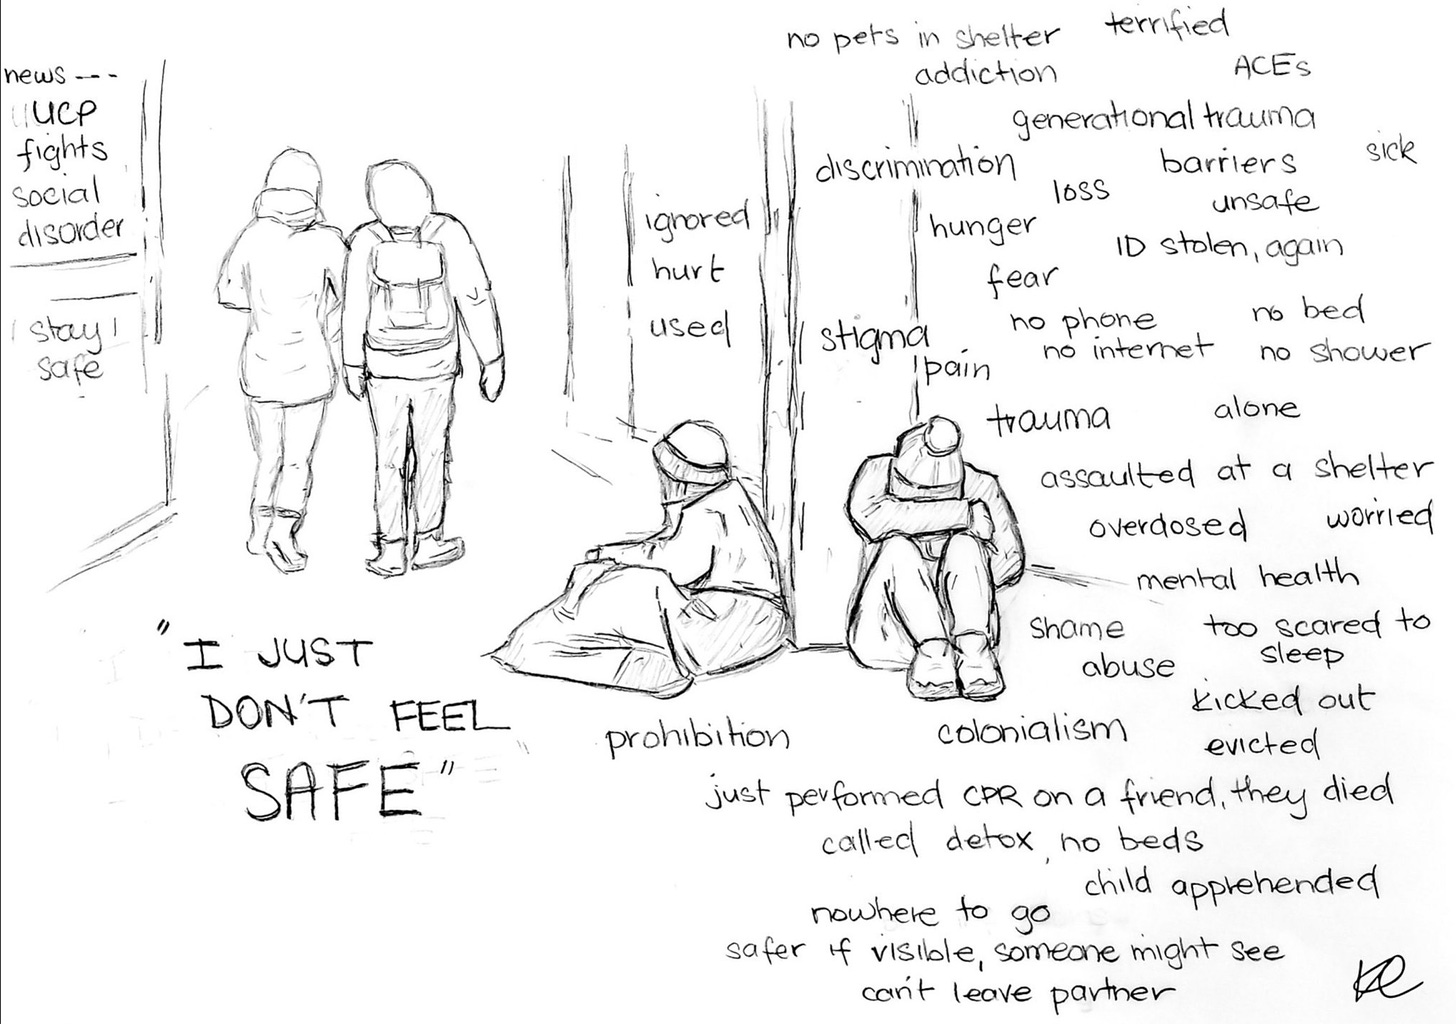 Drawing by Dr Kate Colizza, Illustration of two people walking down an alley beside a newspaper headline reading "UCP fights social disorder" with the speech quote below reading "I just don't feel SAFE", while two street-involved folks sit against the wall surrounding by wording including "prohibition, colonialism, child apprehended, nowhere to go, just performed CPR on a friend/they died, called detox/no beds..." 